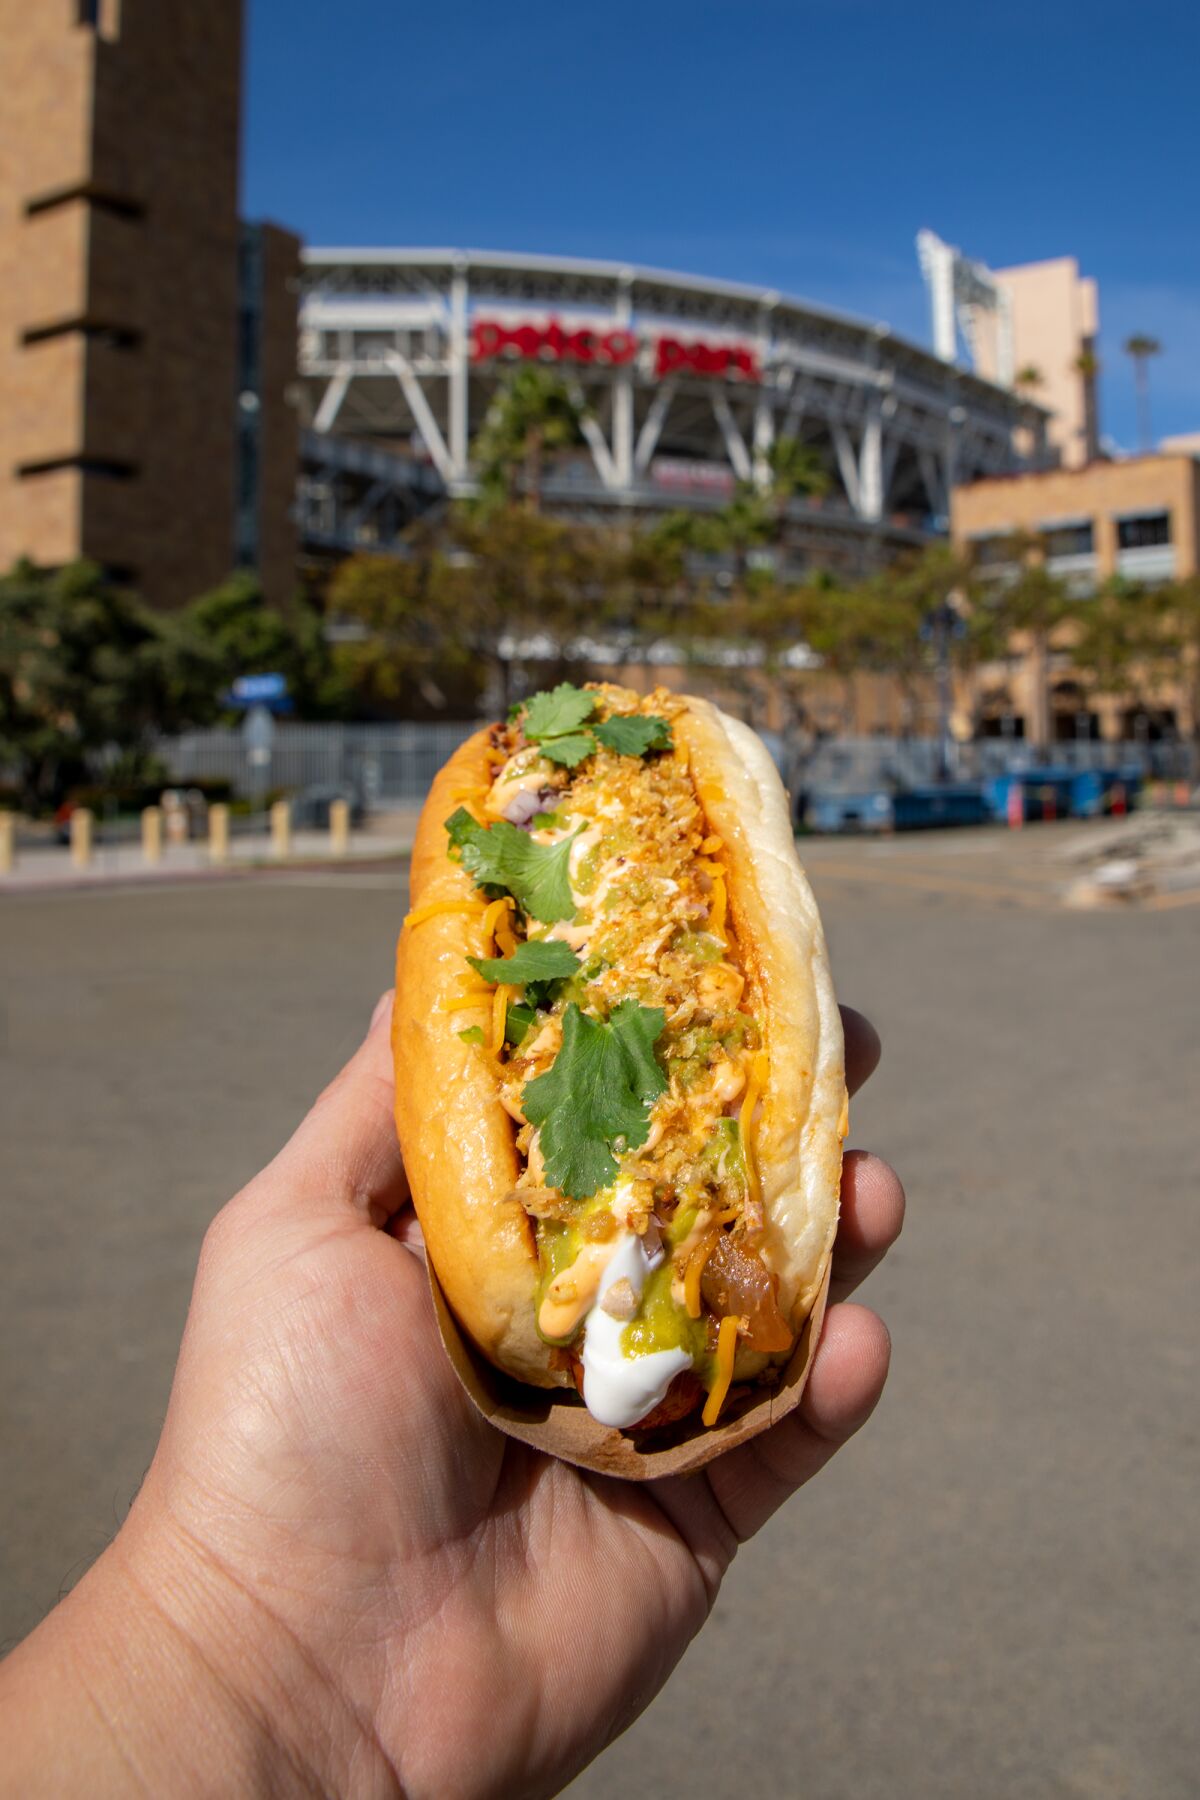 Barrio Dogg, the Barrio Logan-born beef hot dog and sandwich shop, debuted at Petco Park in 2021.